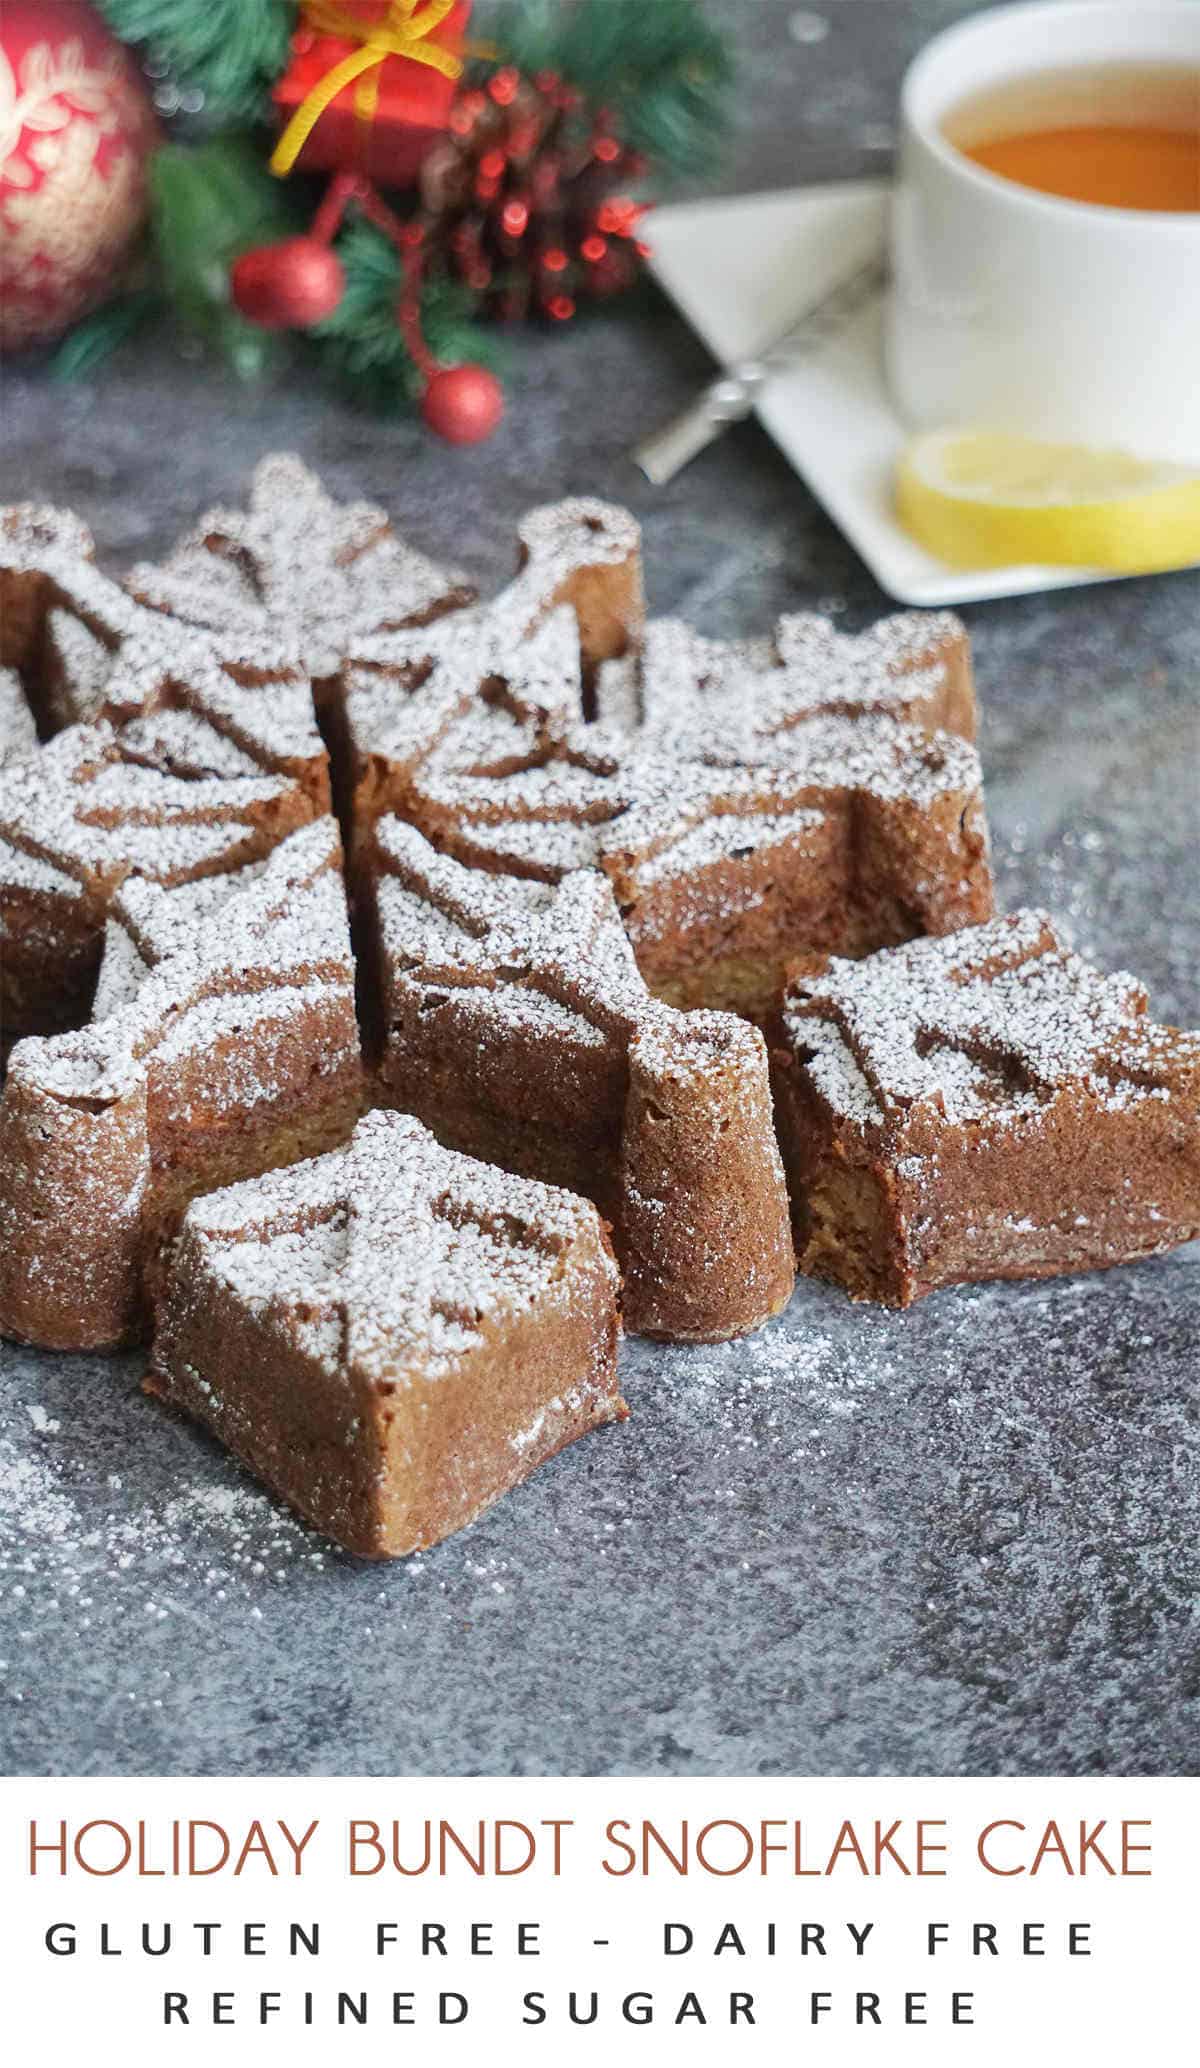 Gluten free Christmas bundt cake recipe (Dairy Free). An easy simple gluten free Christmas bundt cake made in a snowflake shaped bundt pan with healthy gluten free, dairy free ingredients. This Gluten Free Christmas bundt cake is soft, moist and full of of apple and cinnamon flavor – a perfect holiday dessert, the kids will love it!